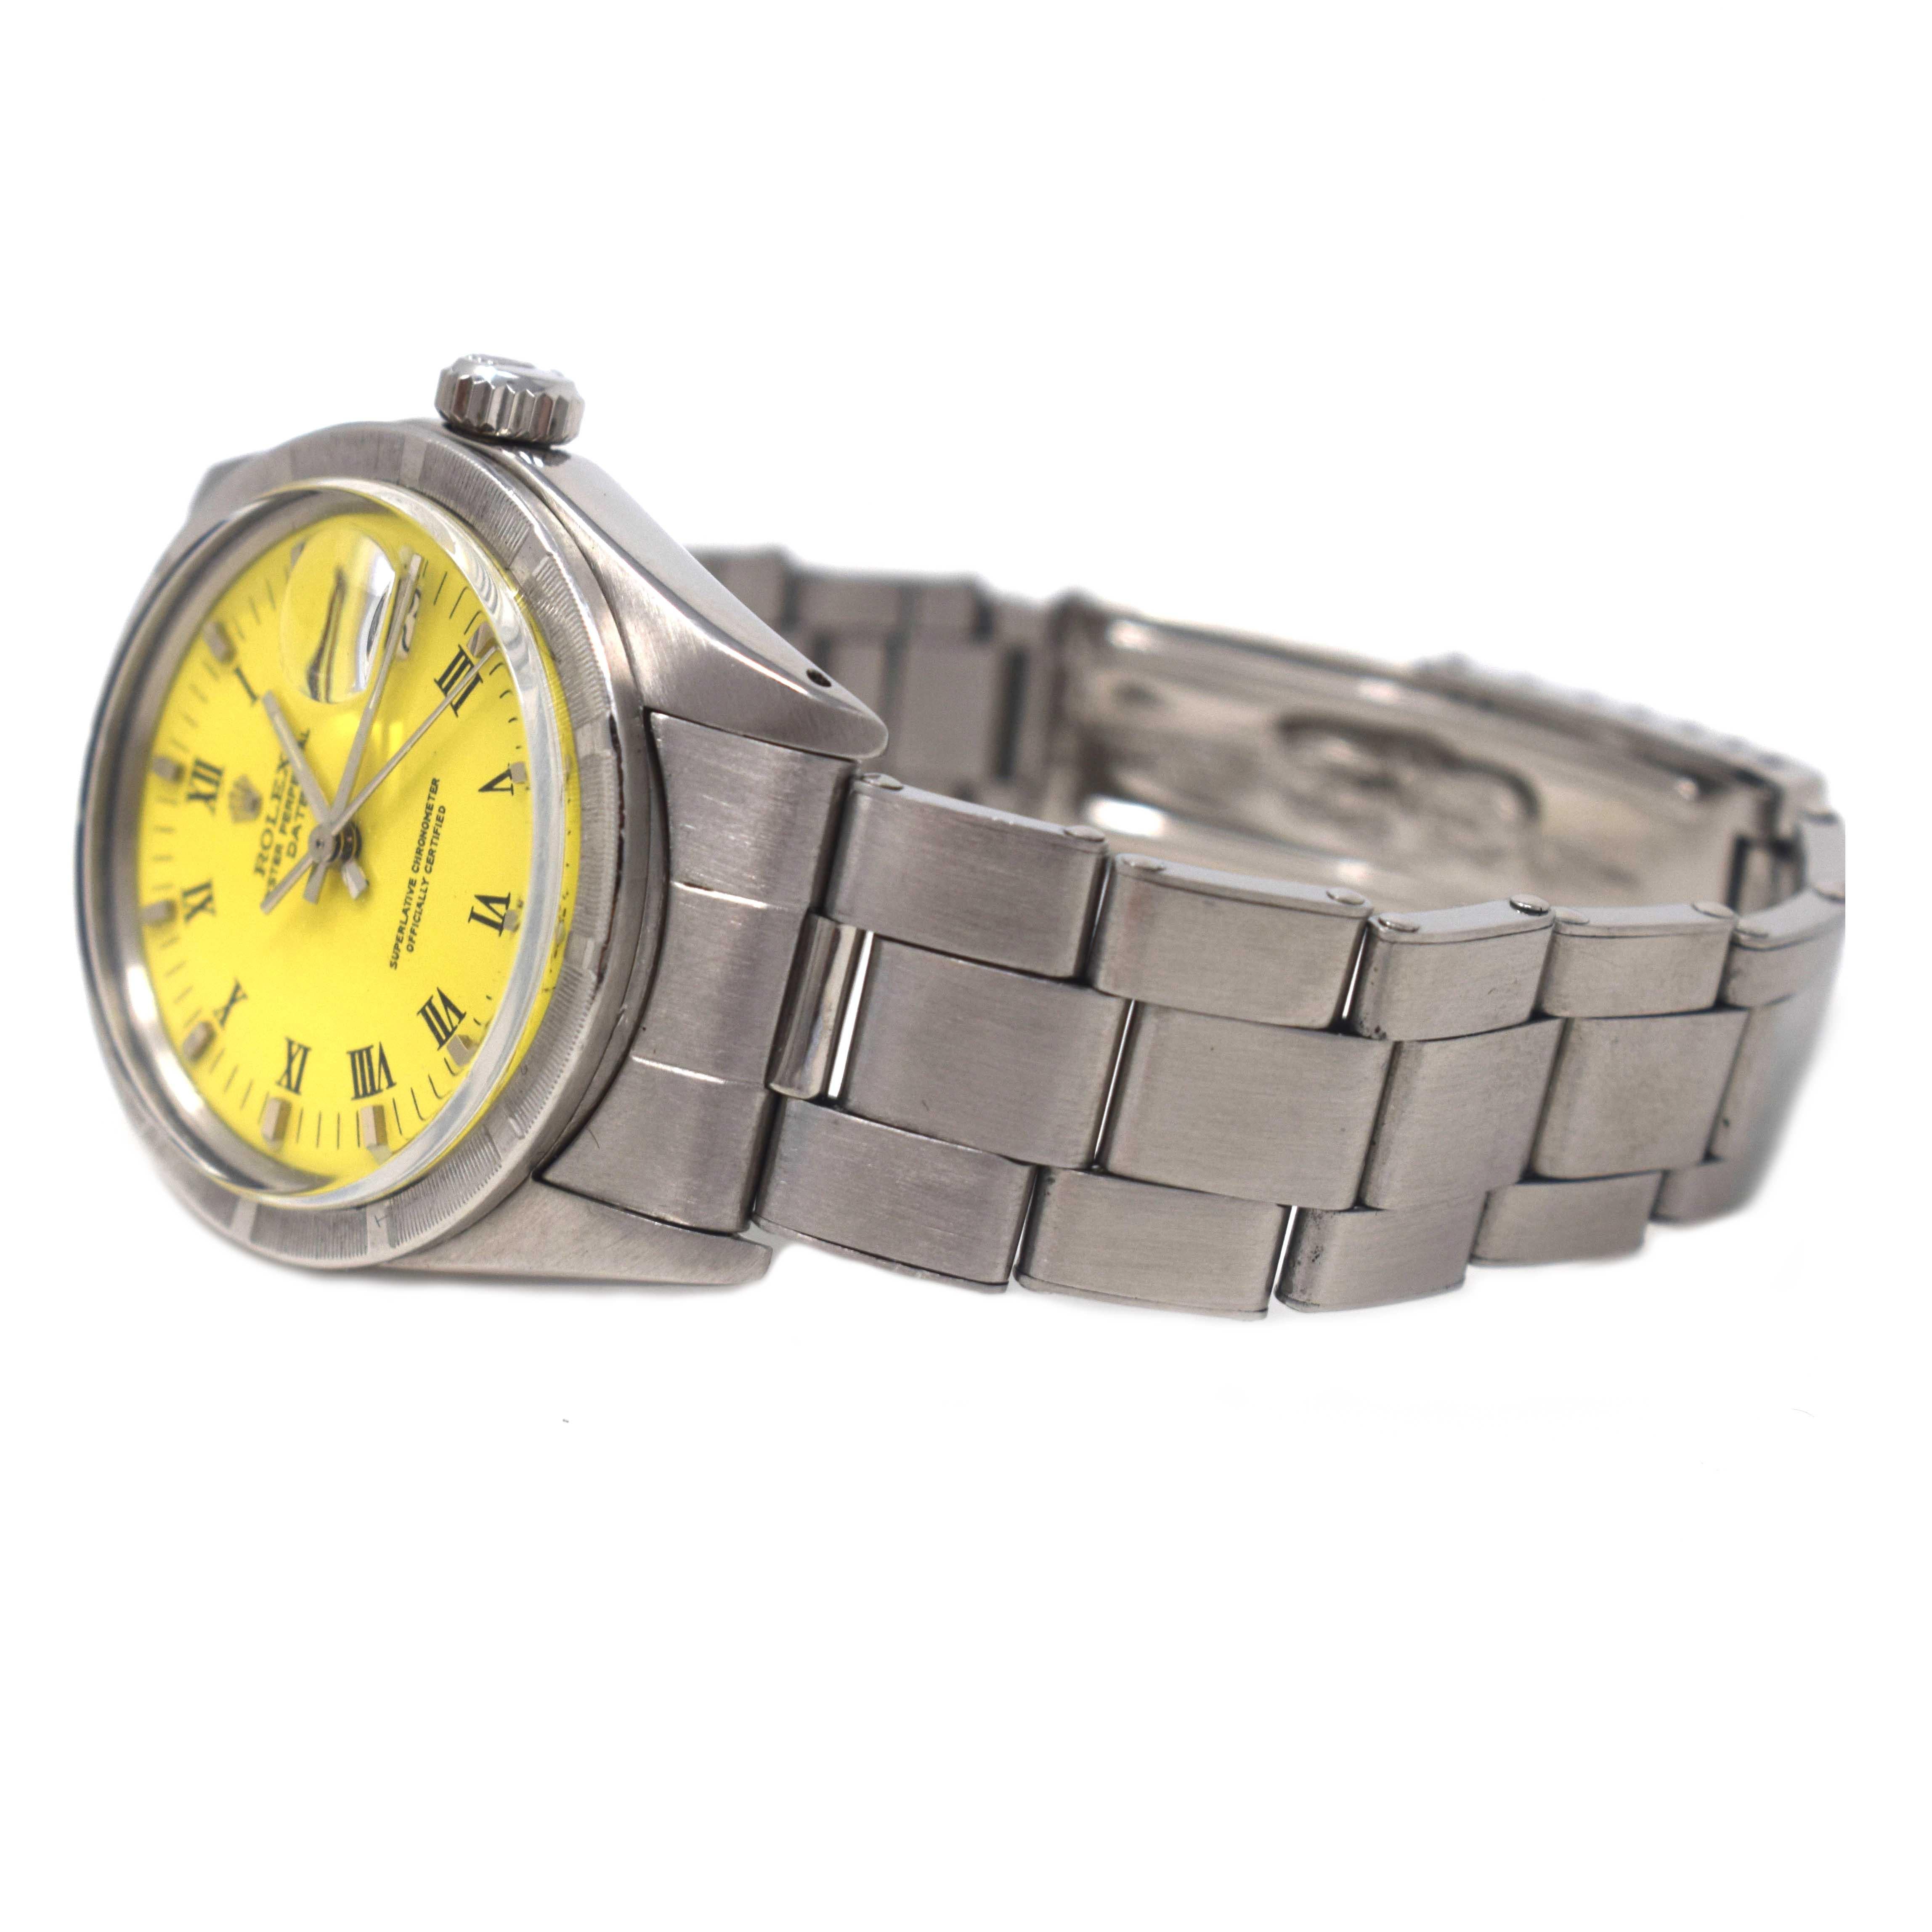 Brilliance Jewels, Miami
Questions? Call Us Anytime!
786,482,8100

Brand: Rolex

Model Number: 1501

Model Name:  Date

Serial Number:  3,4** (either 1973)

Movement: Automatic

Case Size:  35 mm

Dial Color: Yellow

Dial: Roman Numerals 

Bracelet